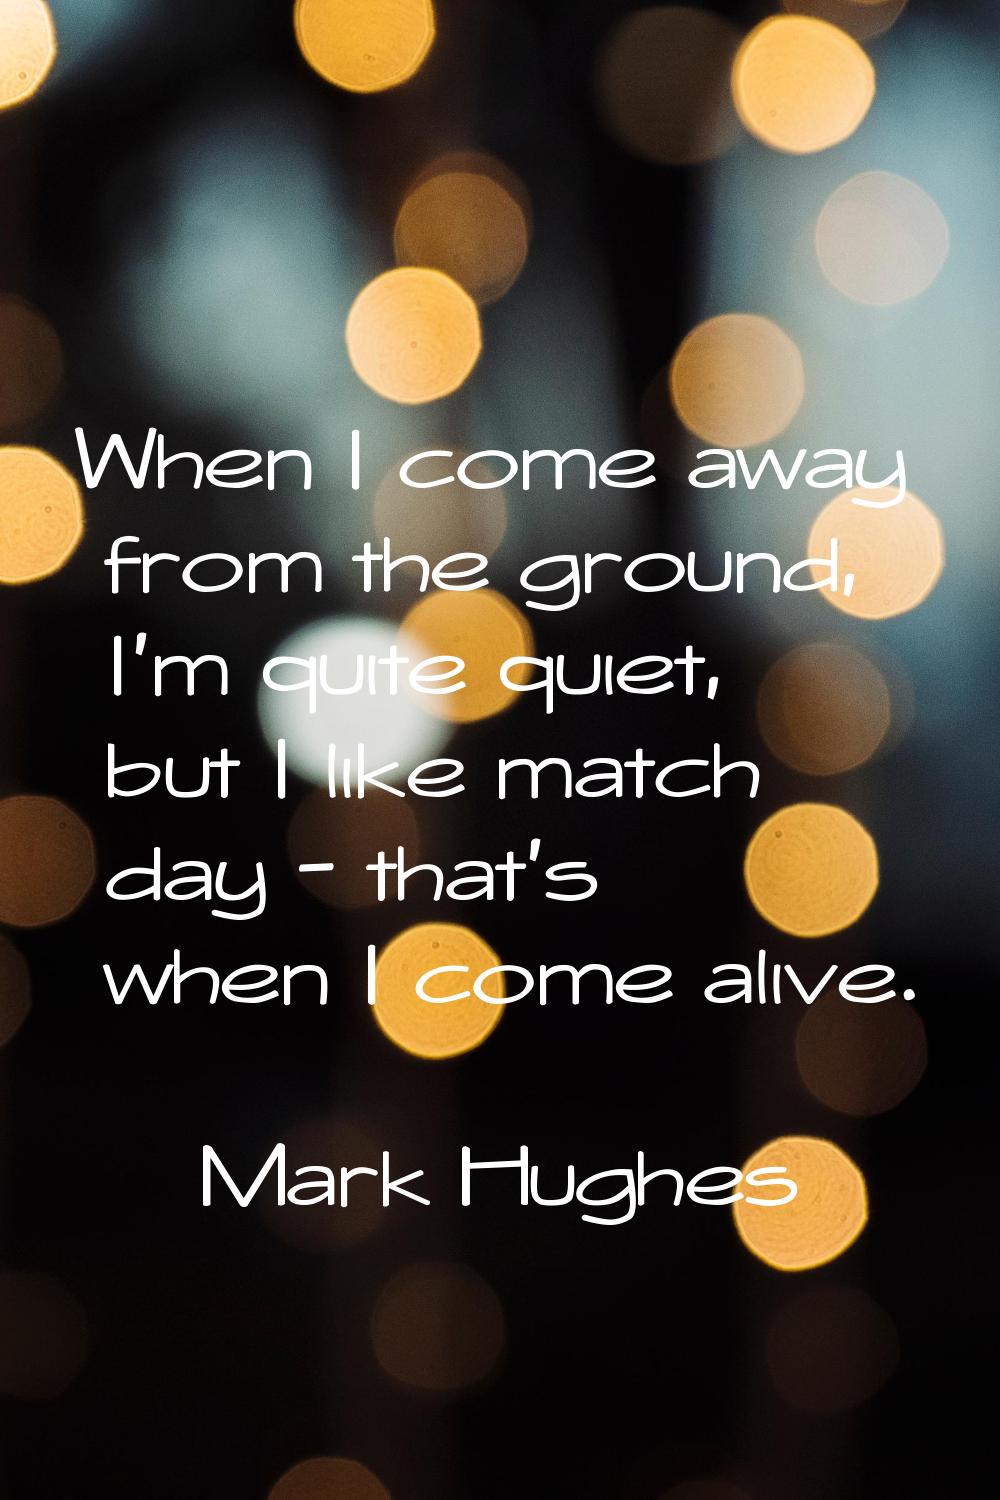 When I come away from the ground, I'm quite quiet, but I like match day - that's when I come alive.